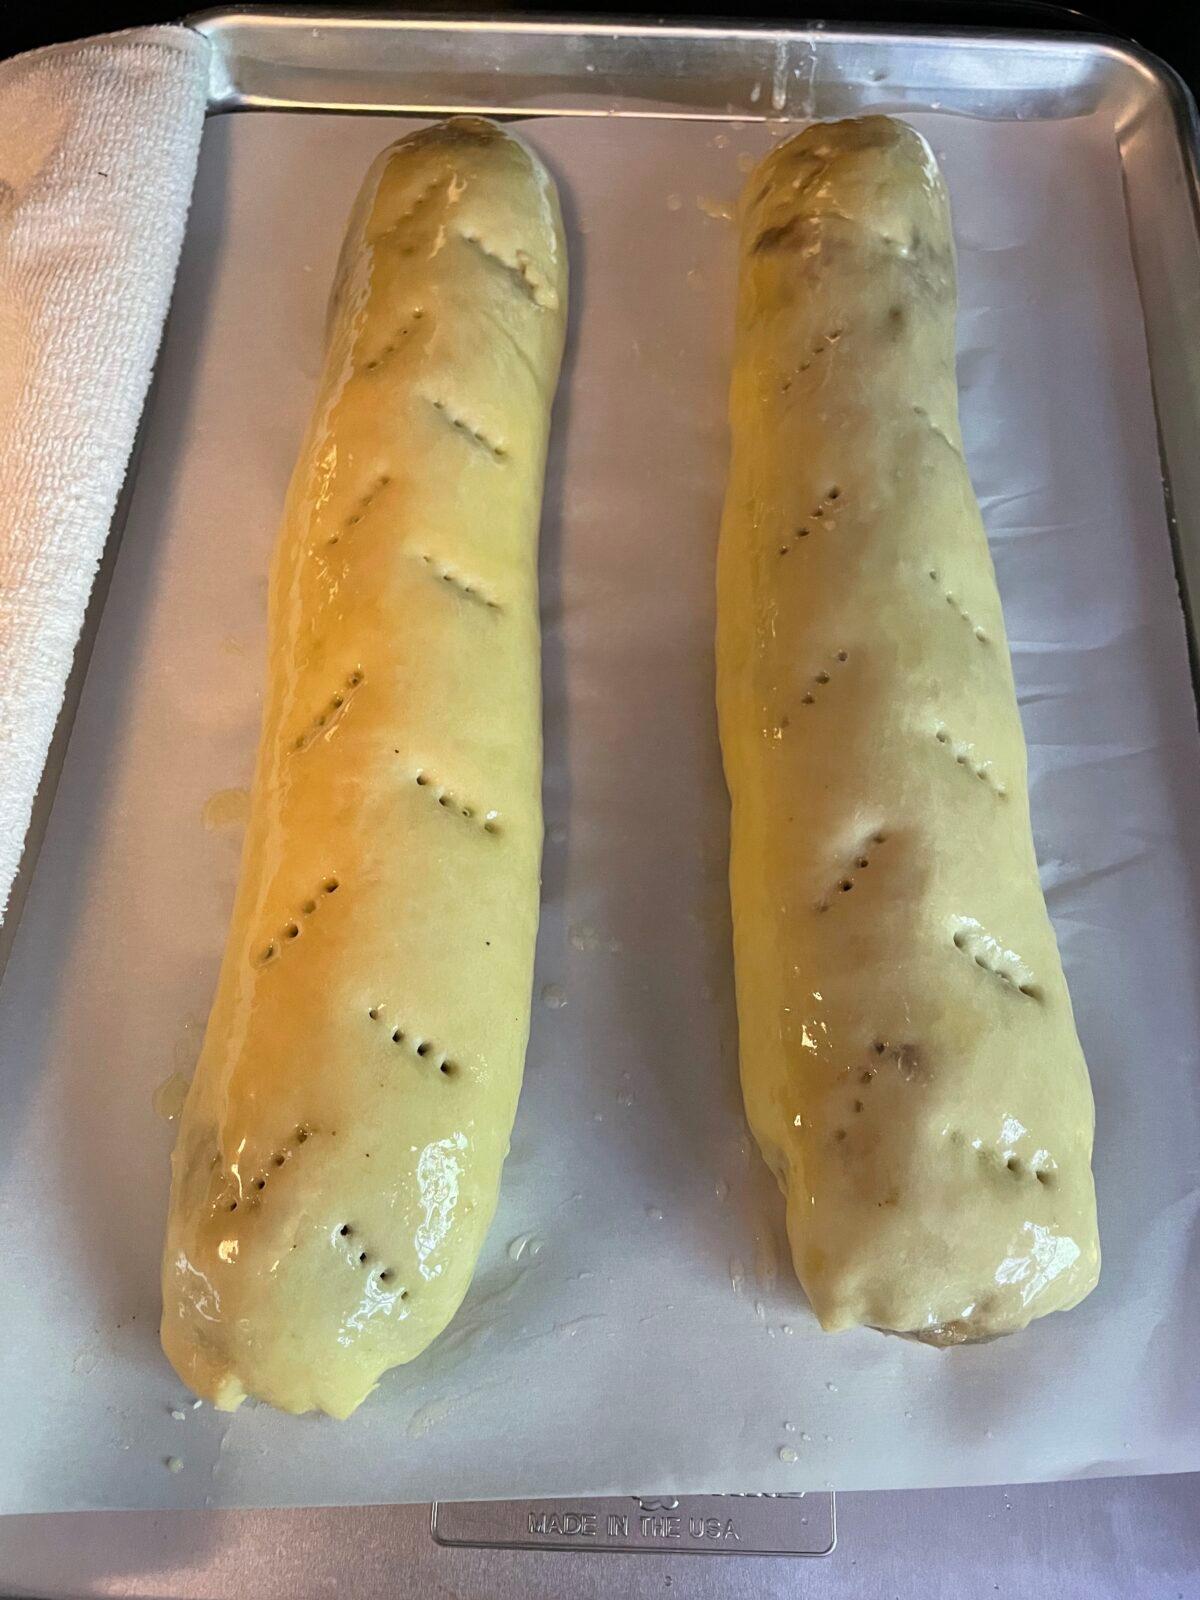 Prick the dough and brush with butter. (Courtesy of Mary Lou Young)